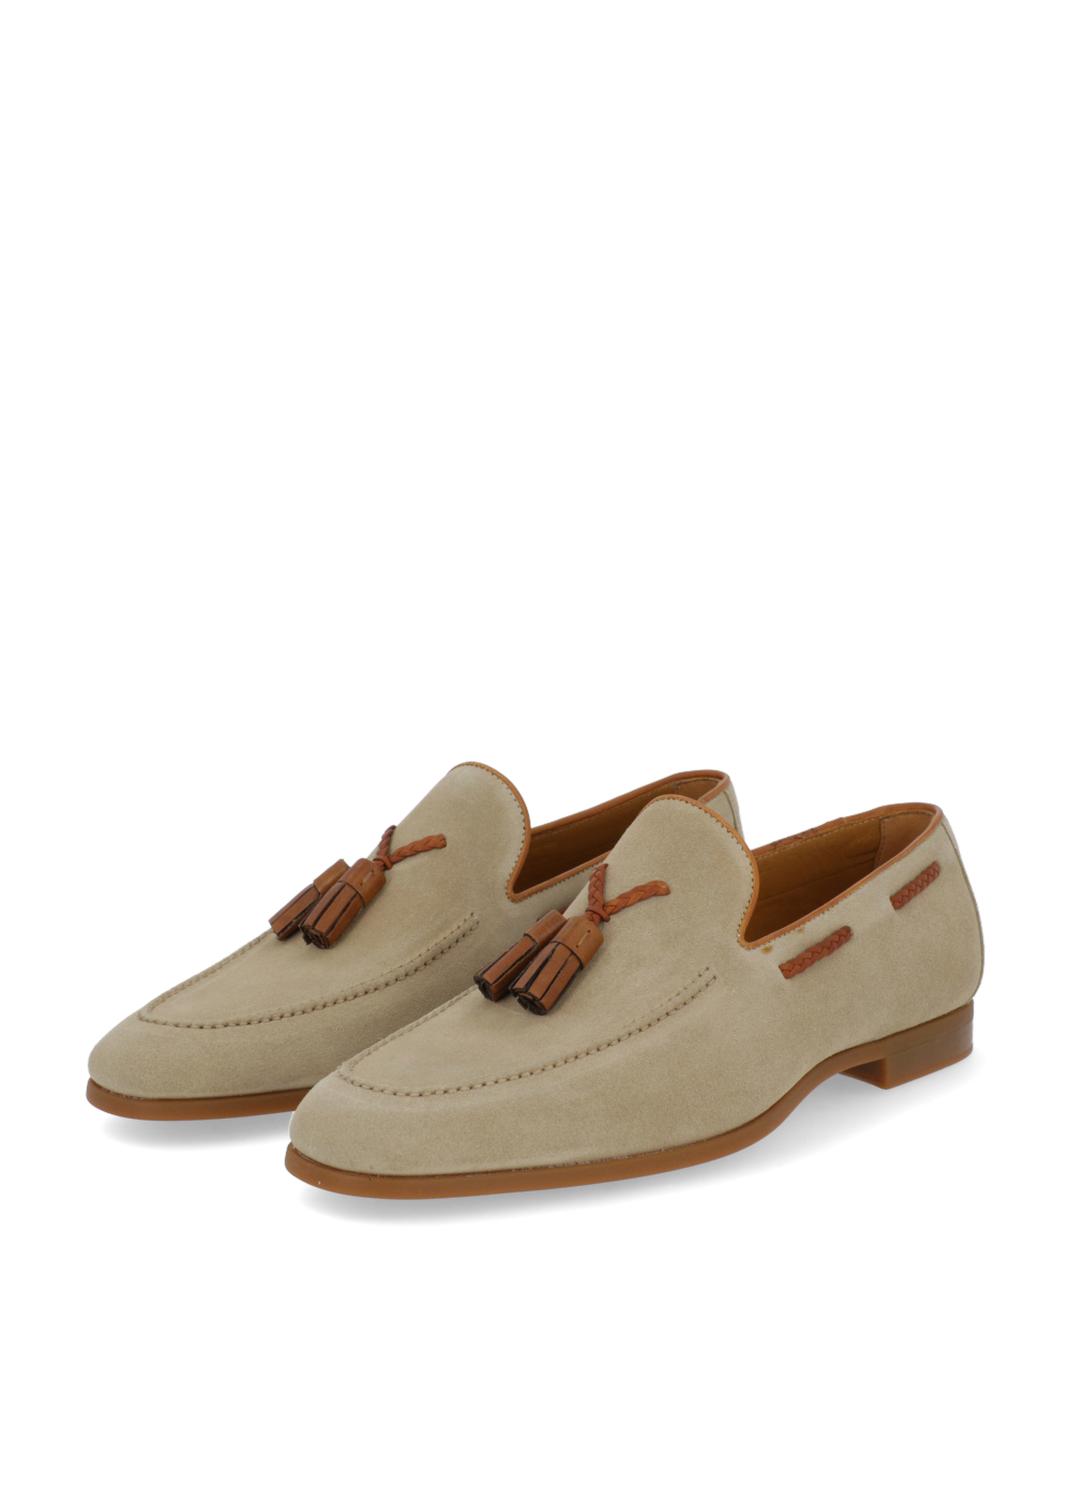 Magnanni loafers Delrey II MGN-24386